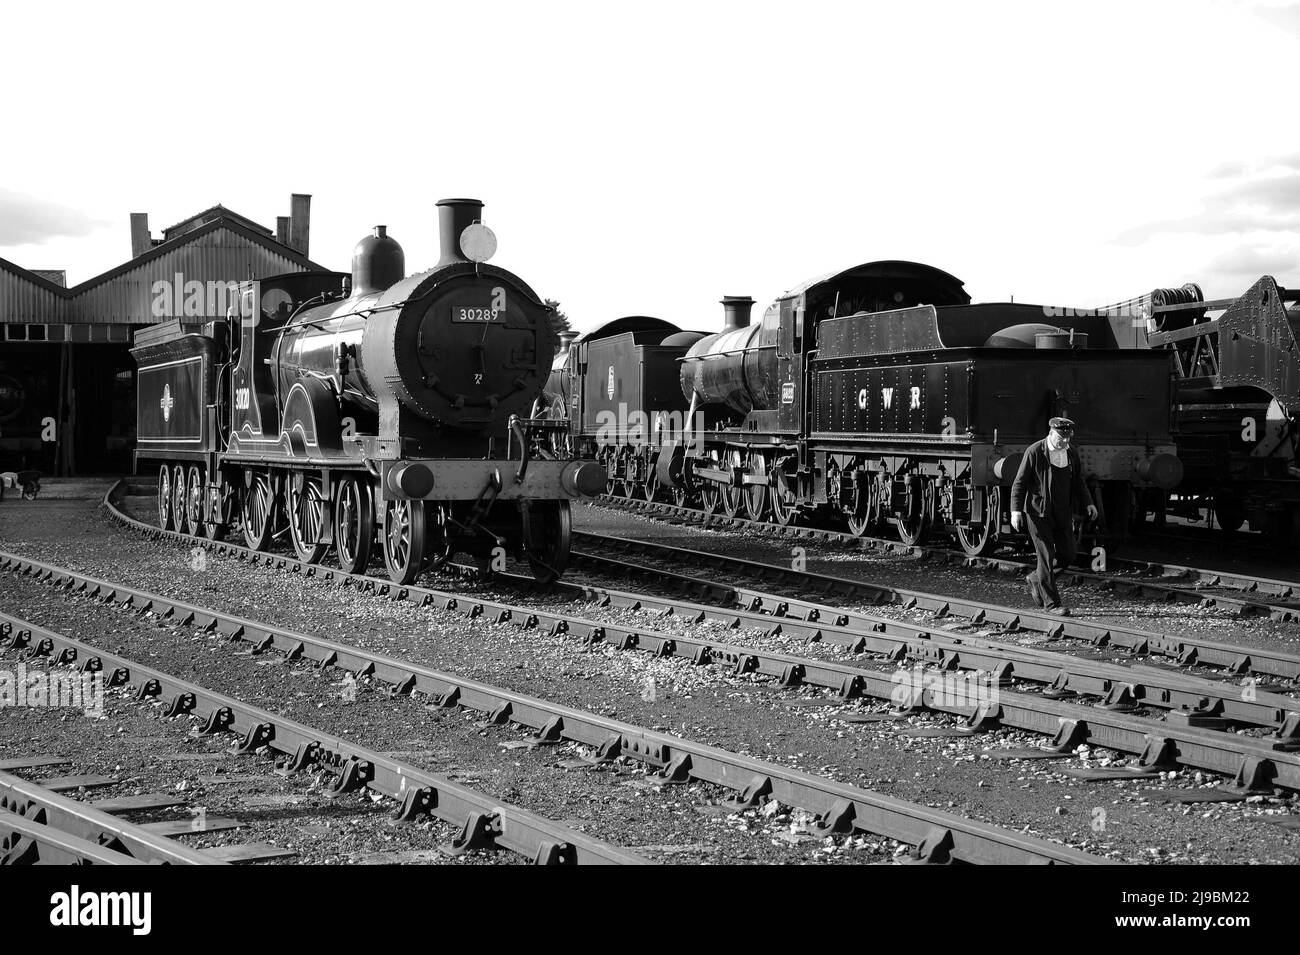 '30120' (running as '30289') on shed with 'Burton Agnes Hall' and '3822'. Stock Photo